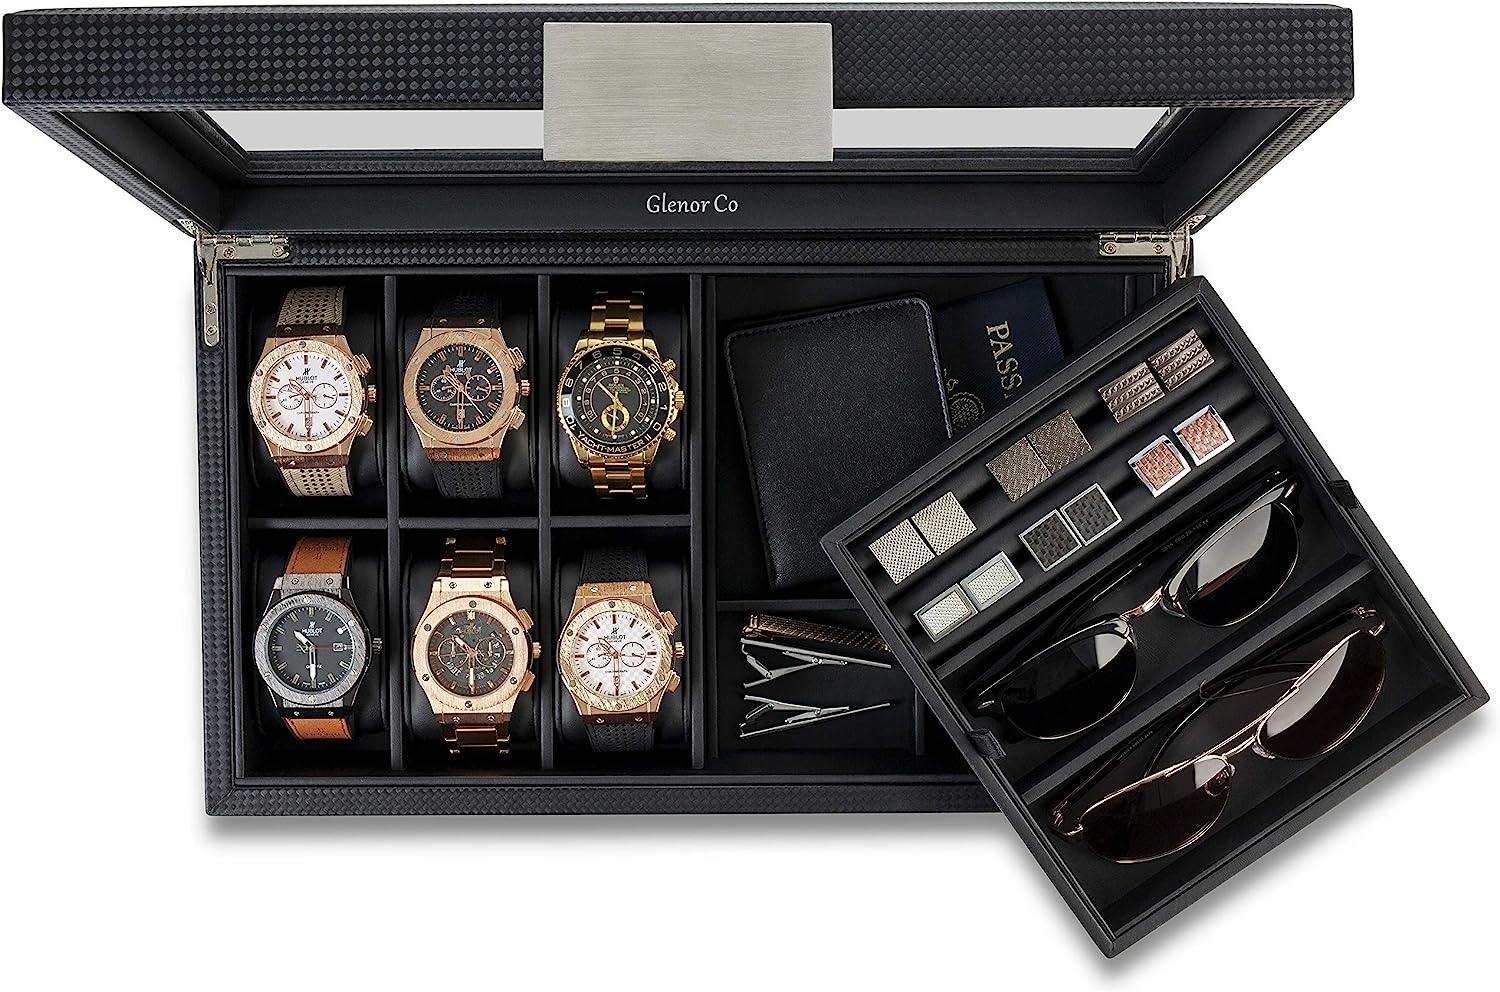 Glenor Co Valet Jewelry Box for Men - Holds 6 Watches, 12 cufflinks, 2 Sunglasses & Tray Storage - Mens Watch Case - CarbonFiber Organizer w Metal Accents, PU Leather & Large Glass Lid - Black